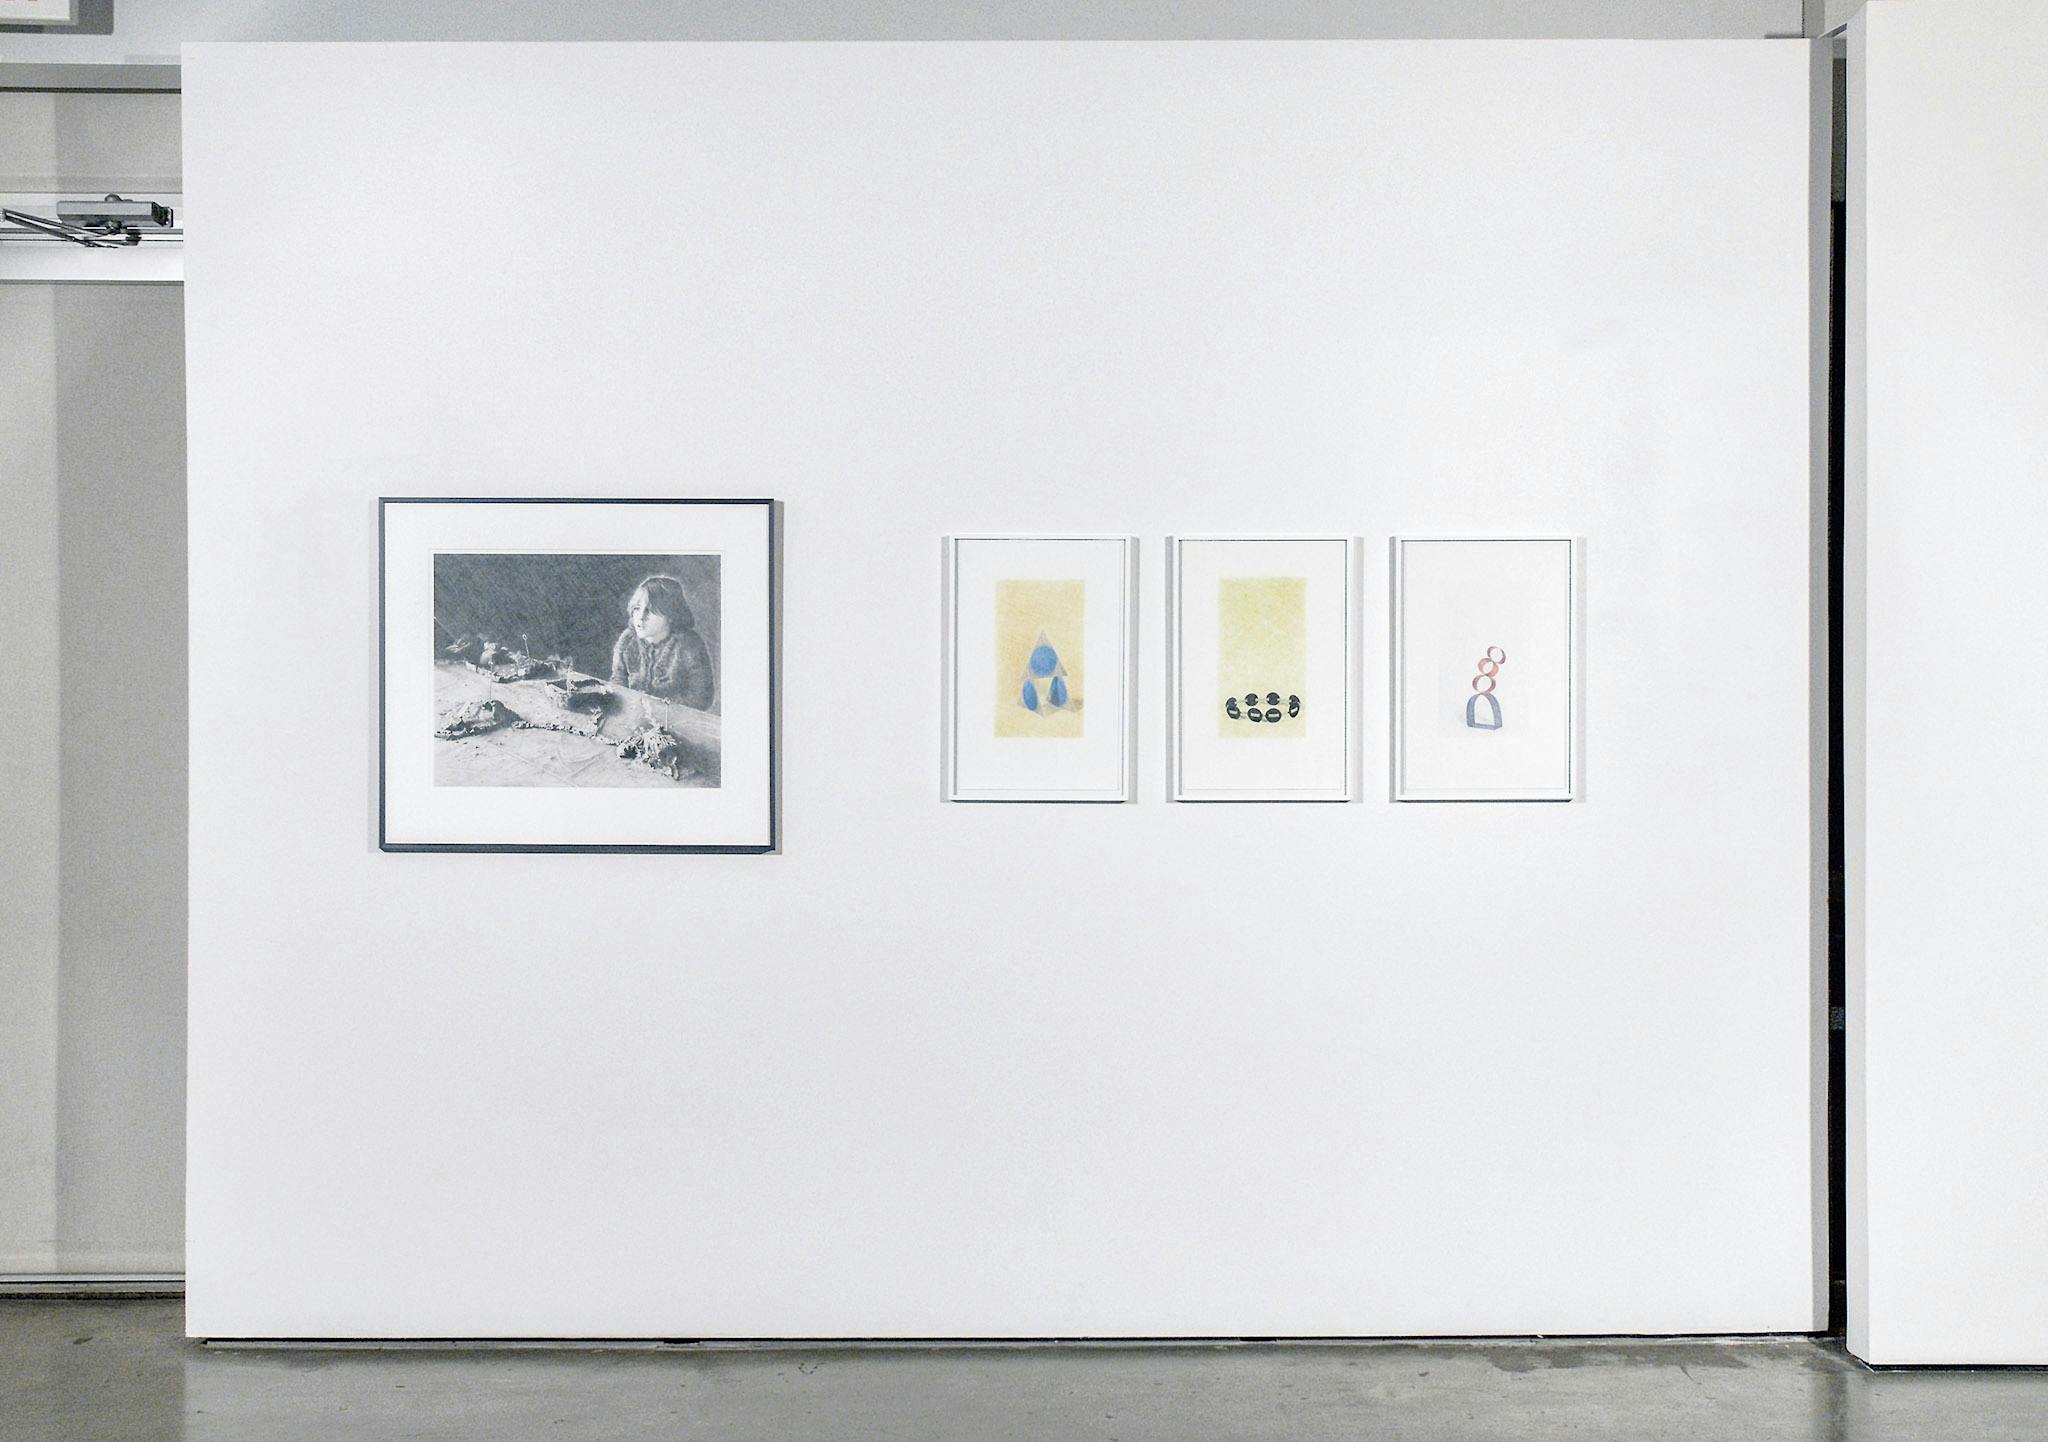 Four drawings are mounted on a gallery wall. A set of three coloured drawings depict sculptures made of geometric shapes. There is also a black and white drawing of a child sitting at a table. 